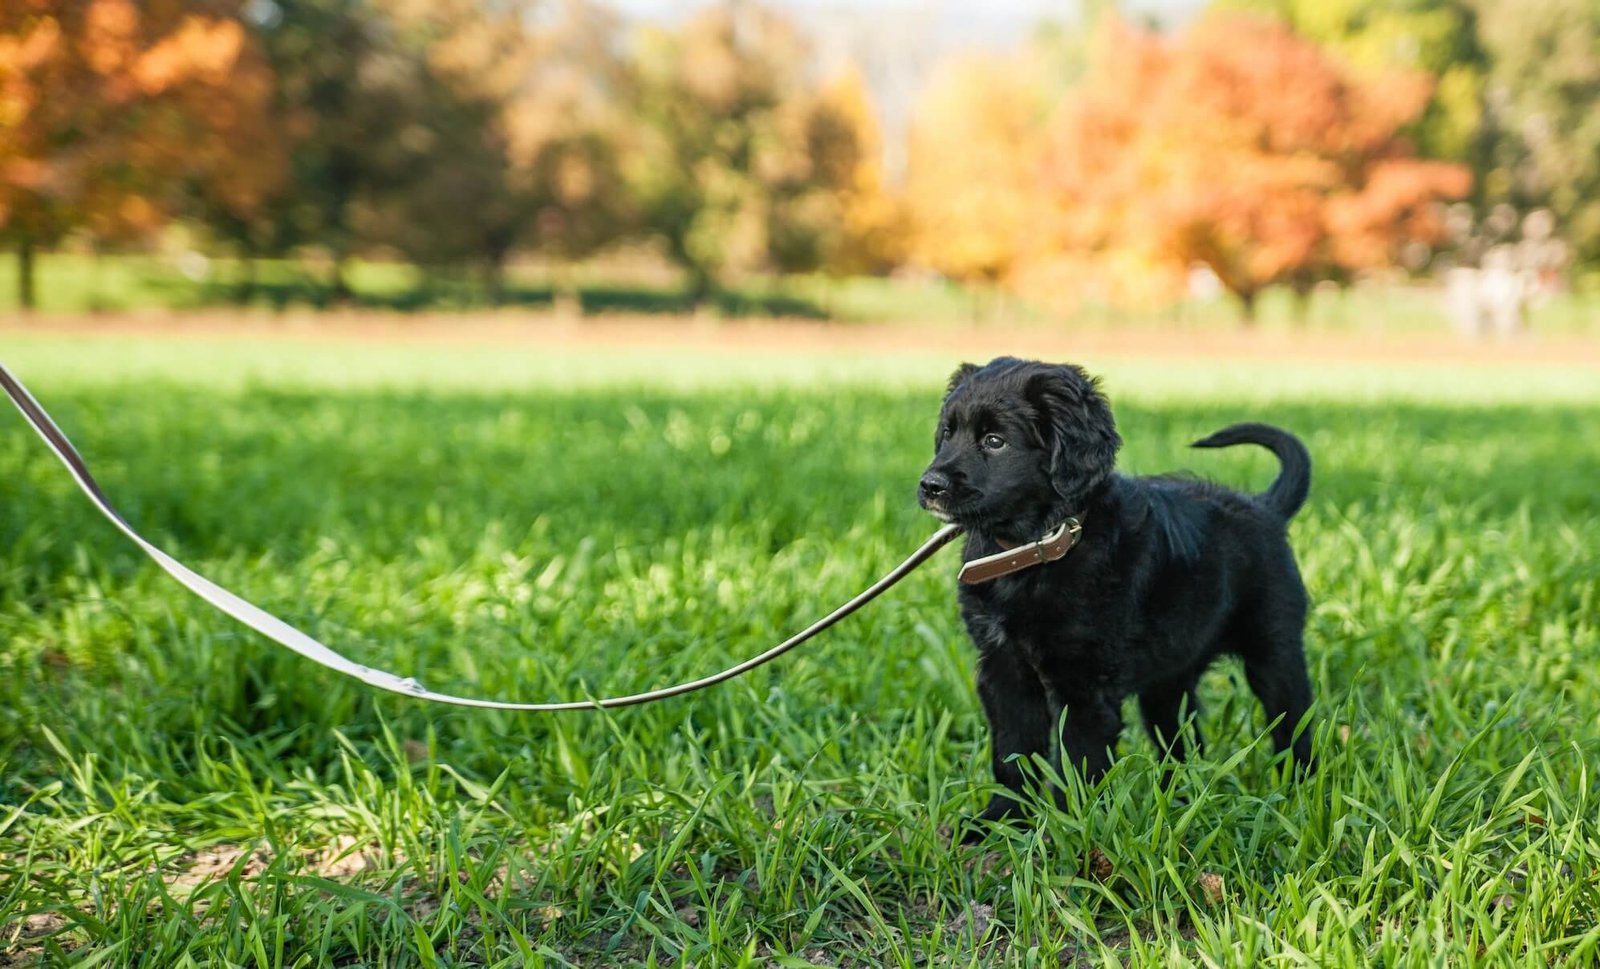 Start leash training your dog early